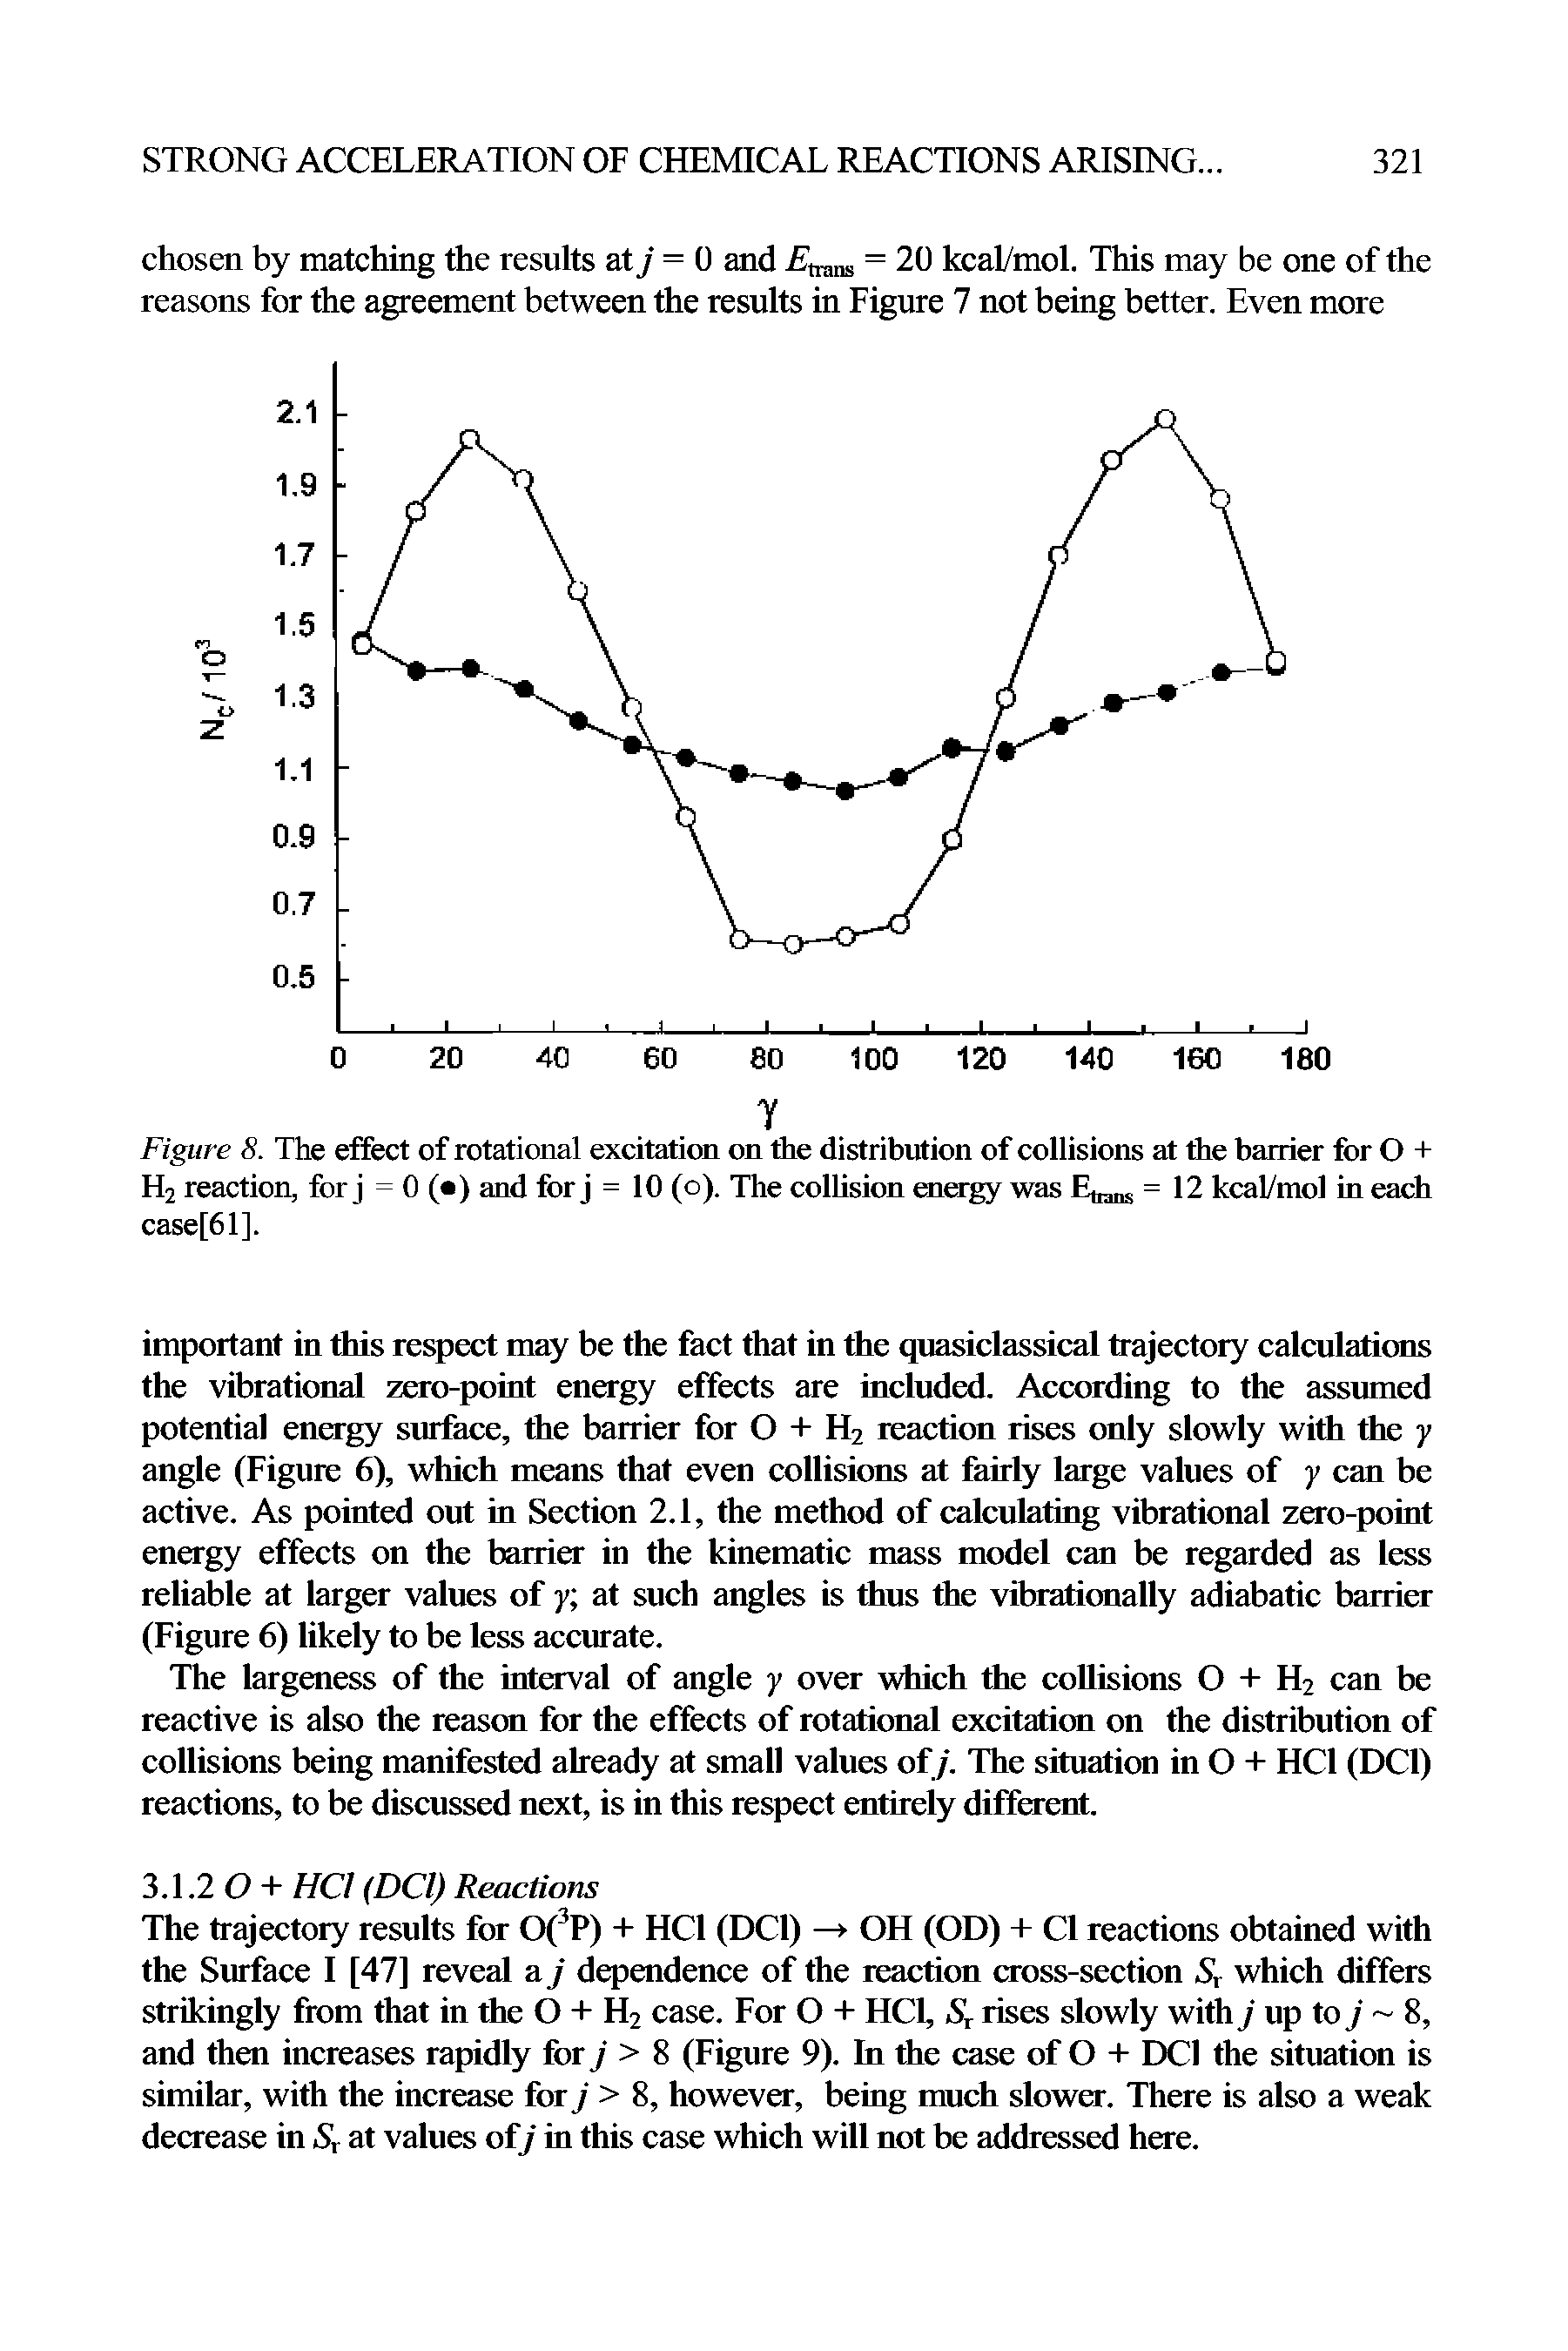 Figure 8. The effect of rotational excitation on the distribution of collisions at the barrier for O + H2 reaction, for j = 0 ( ) and for j = 10 (o). The collision energy was 0 = 12 kcal/mol in each case[61].